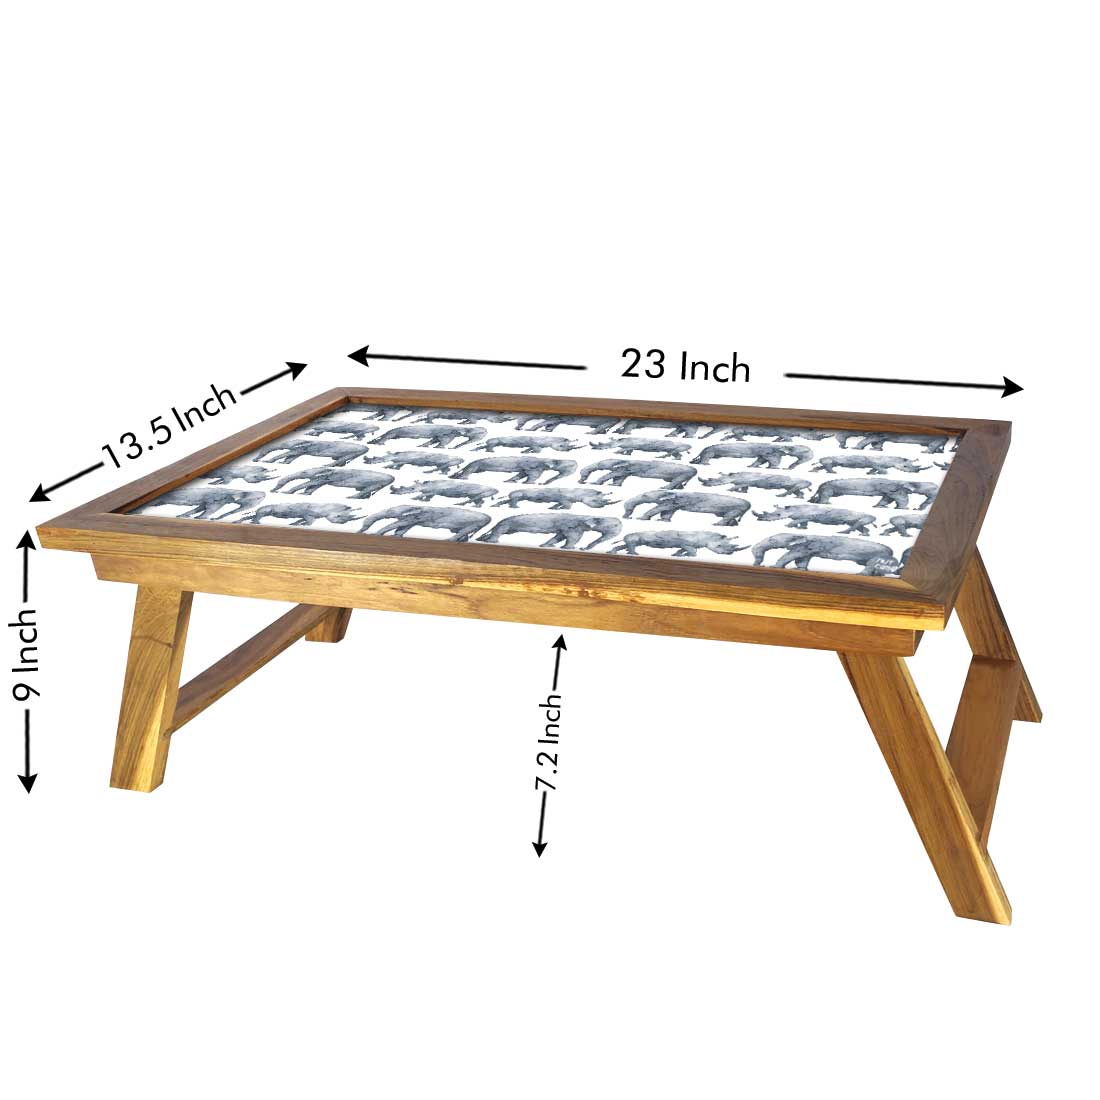 Foldable Reading Tables for Home Bed Breakfast Table Study Desk - Elephants Nutcase